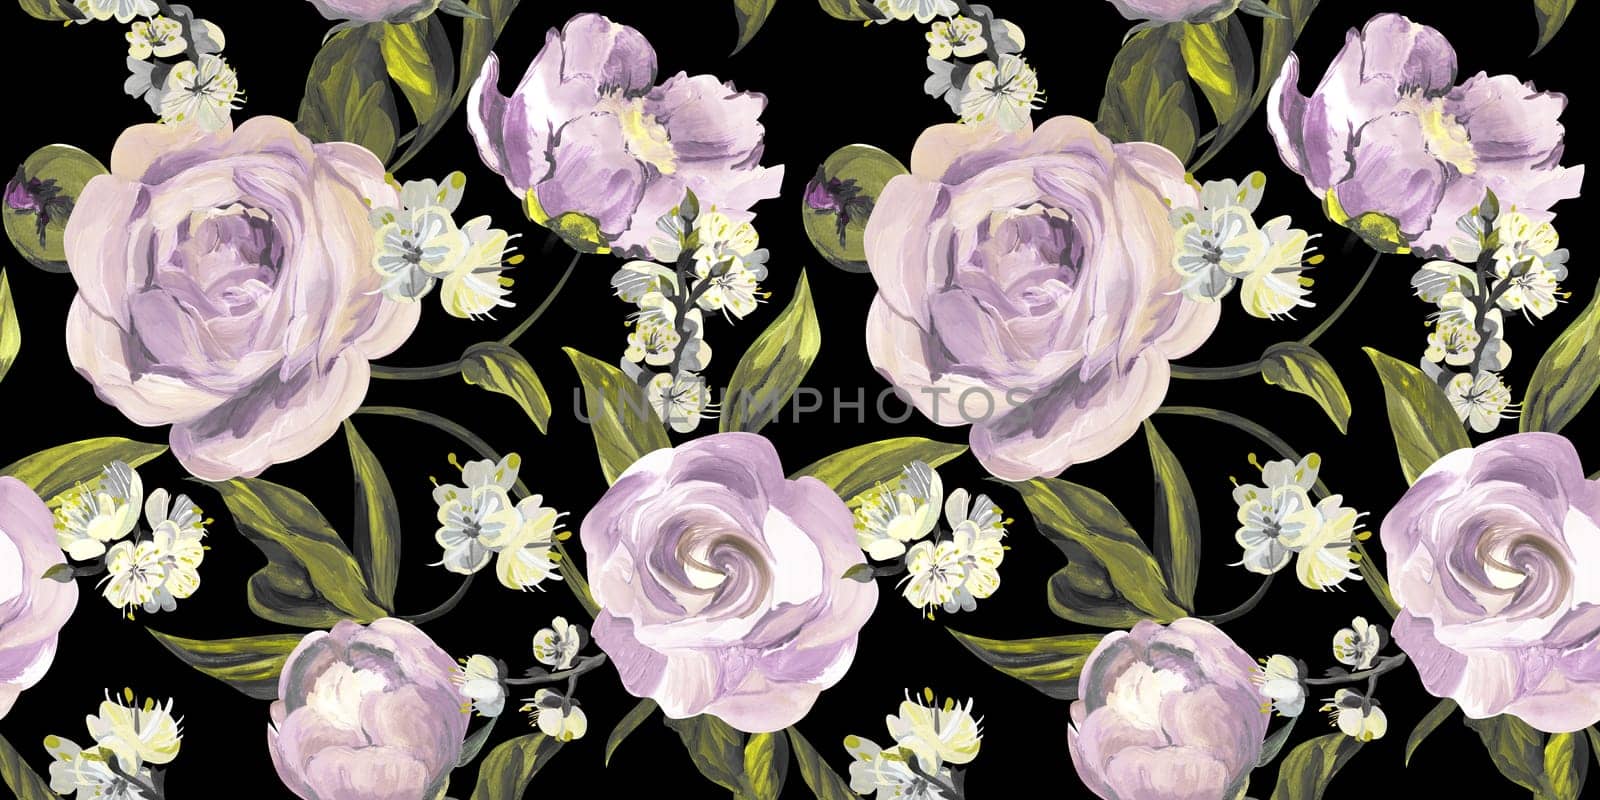 Spring seamless pattern with rose flowers and sakura blossoms for delicate home design feminine decor